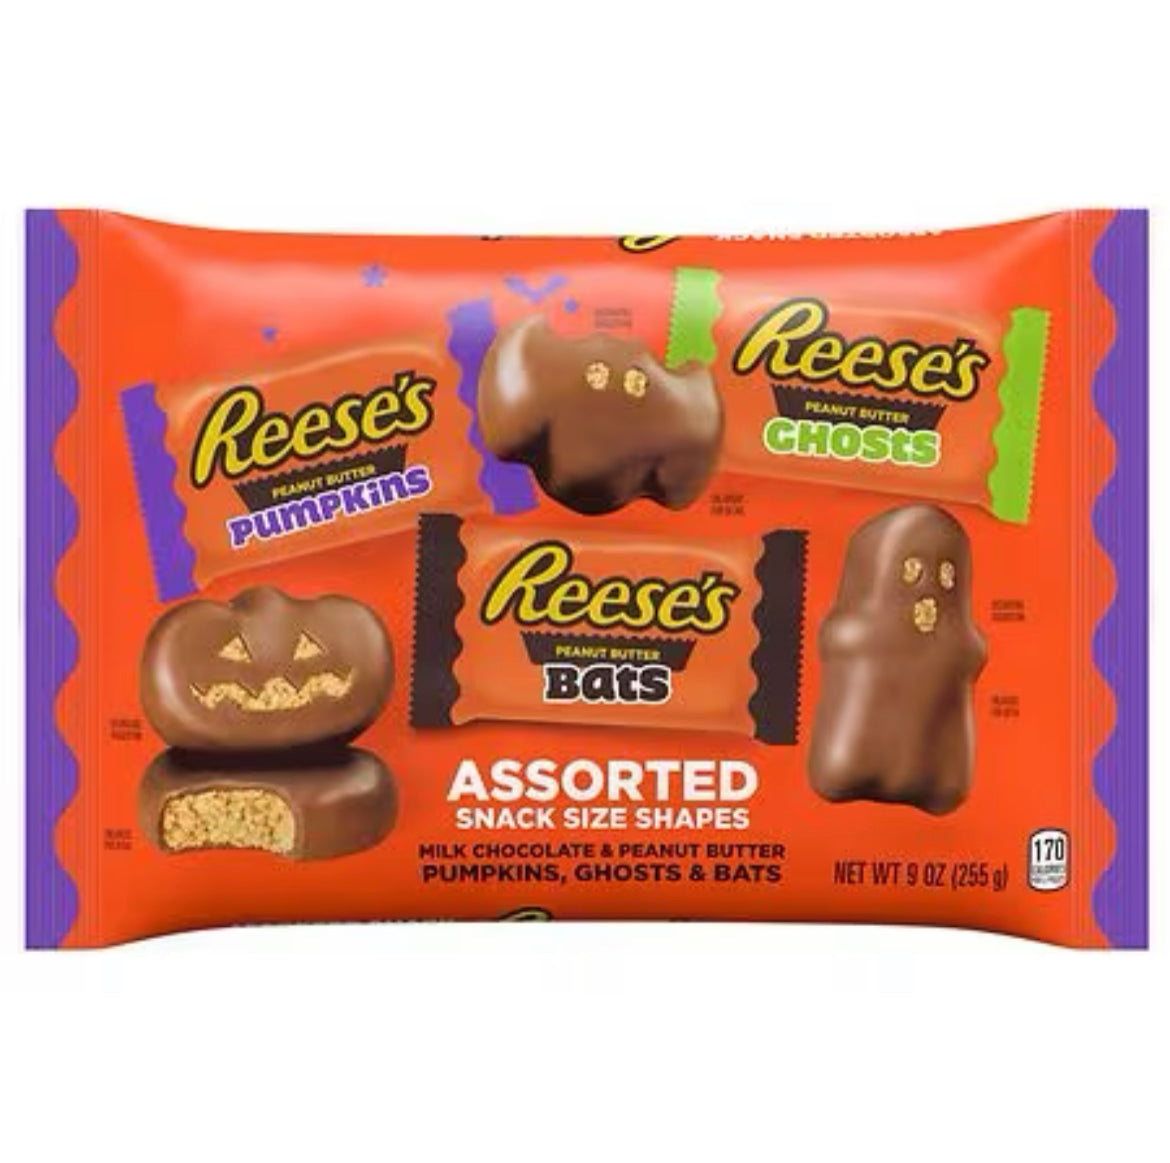 Reese’s Assorted Shapes Snack Size Candy, Halloween Milk Chocolate Peanut Butter, 255g